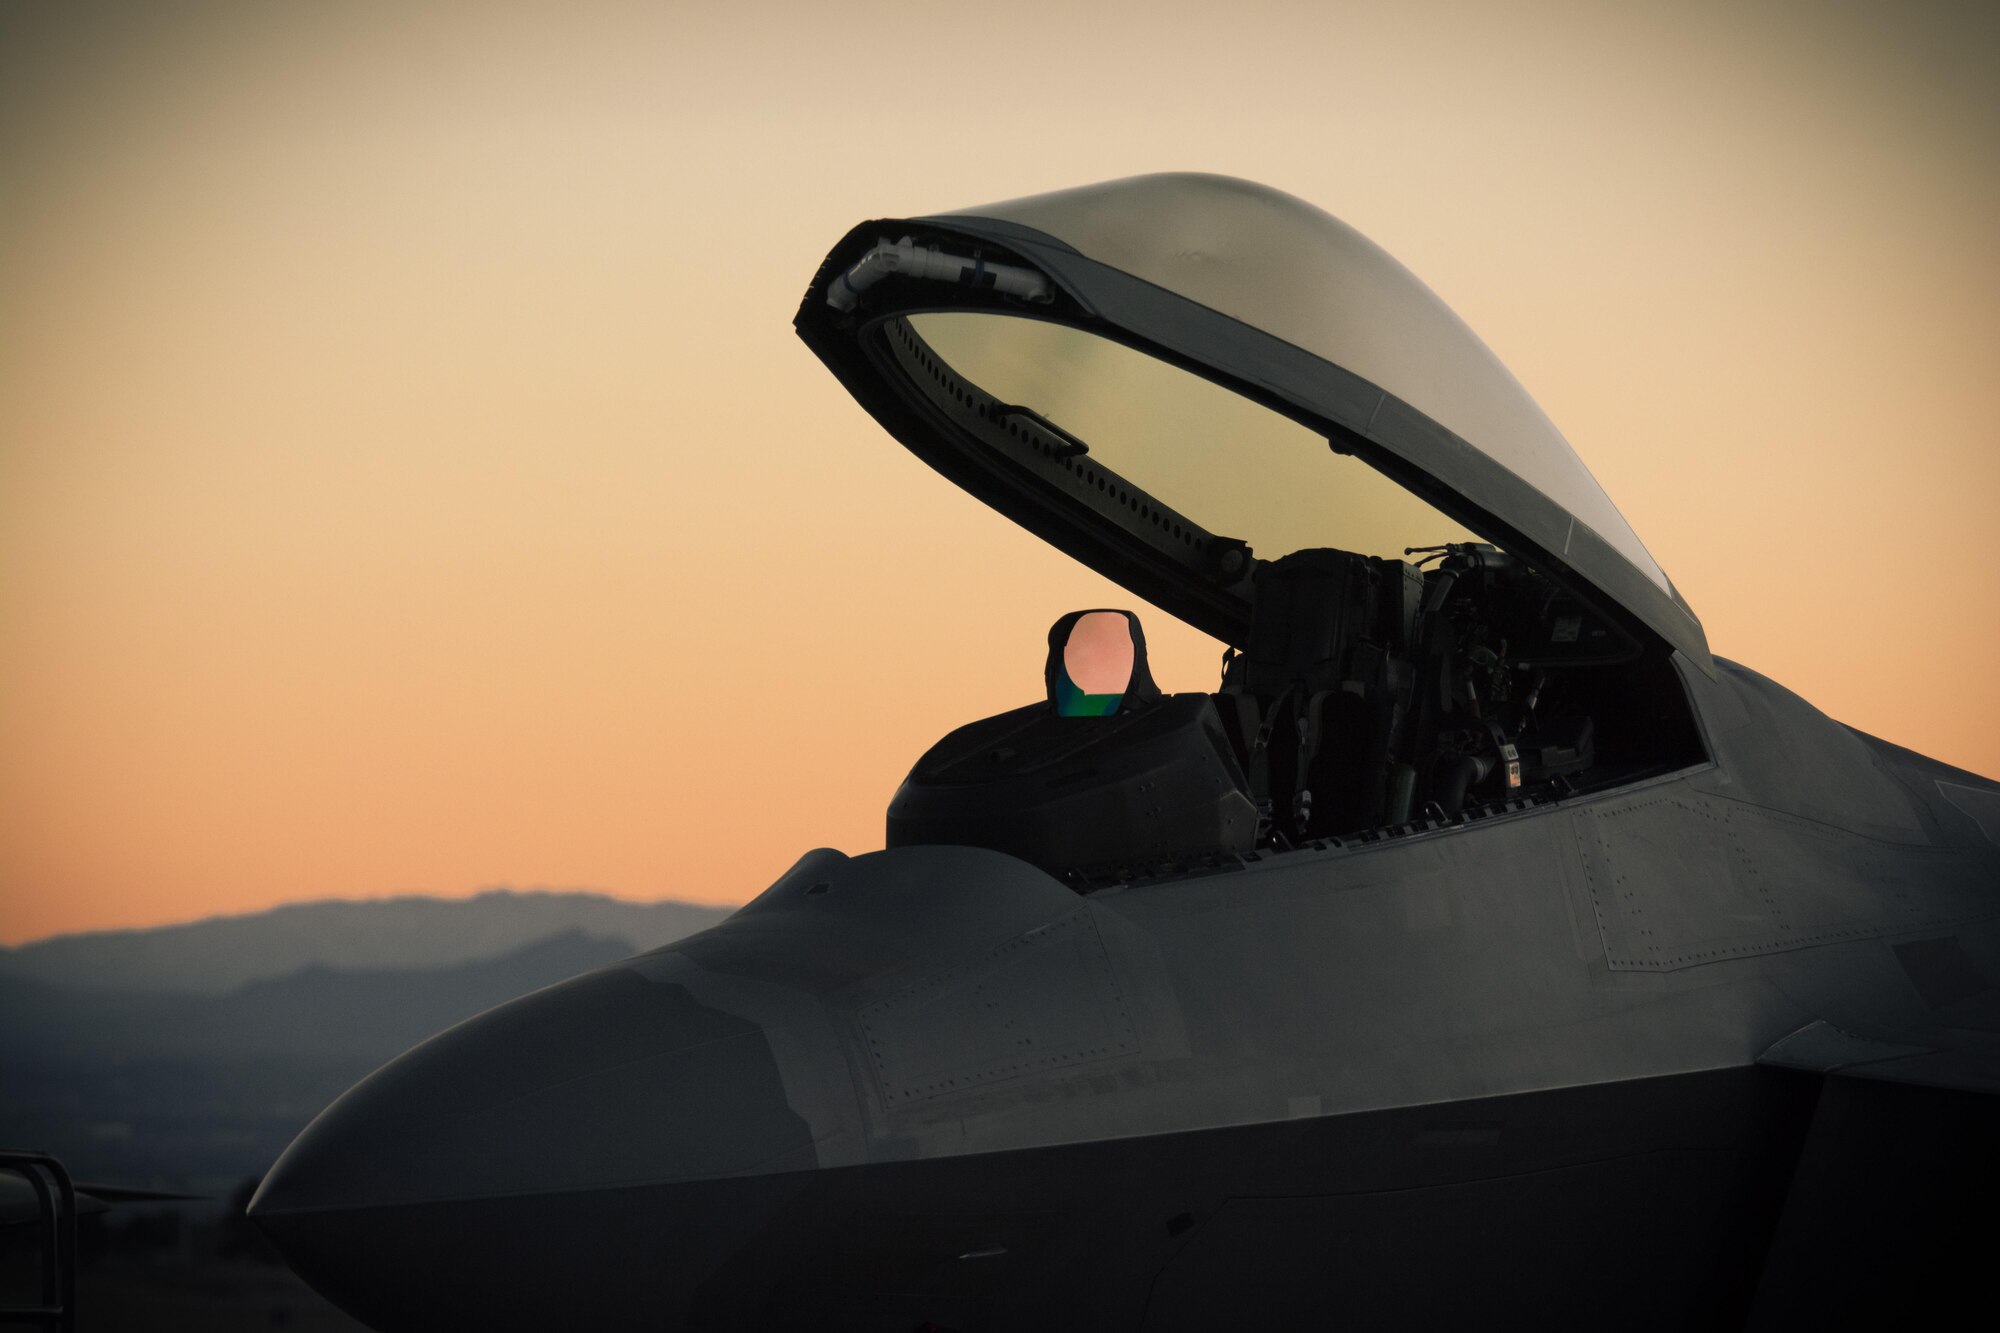 The Virginia Air National Guard,192nd Fighter Wing F-22A Raptor pilots and maintainers, participated in Red Flag 17-1 held at Nellis Air Force Base, Nev., from Jan. 23 to Feb.10 2017. Red Flag is an aerial combat training exercise involving air, space and cyber domains from the United States and allied forces. Pilots, maintenance and support personnel are trained for real air combat situations.(U.S. Force Photo/Senior Airman Kellyann Novak)
